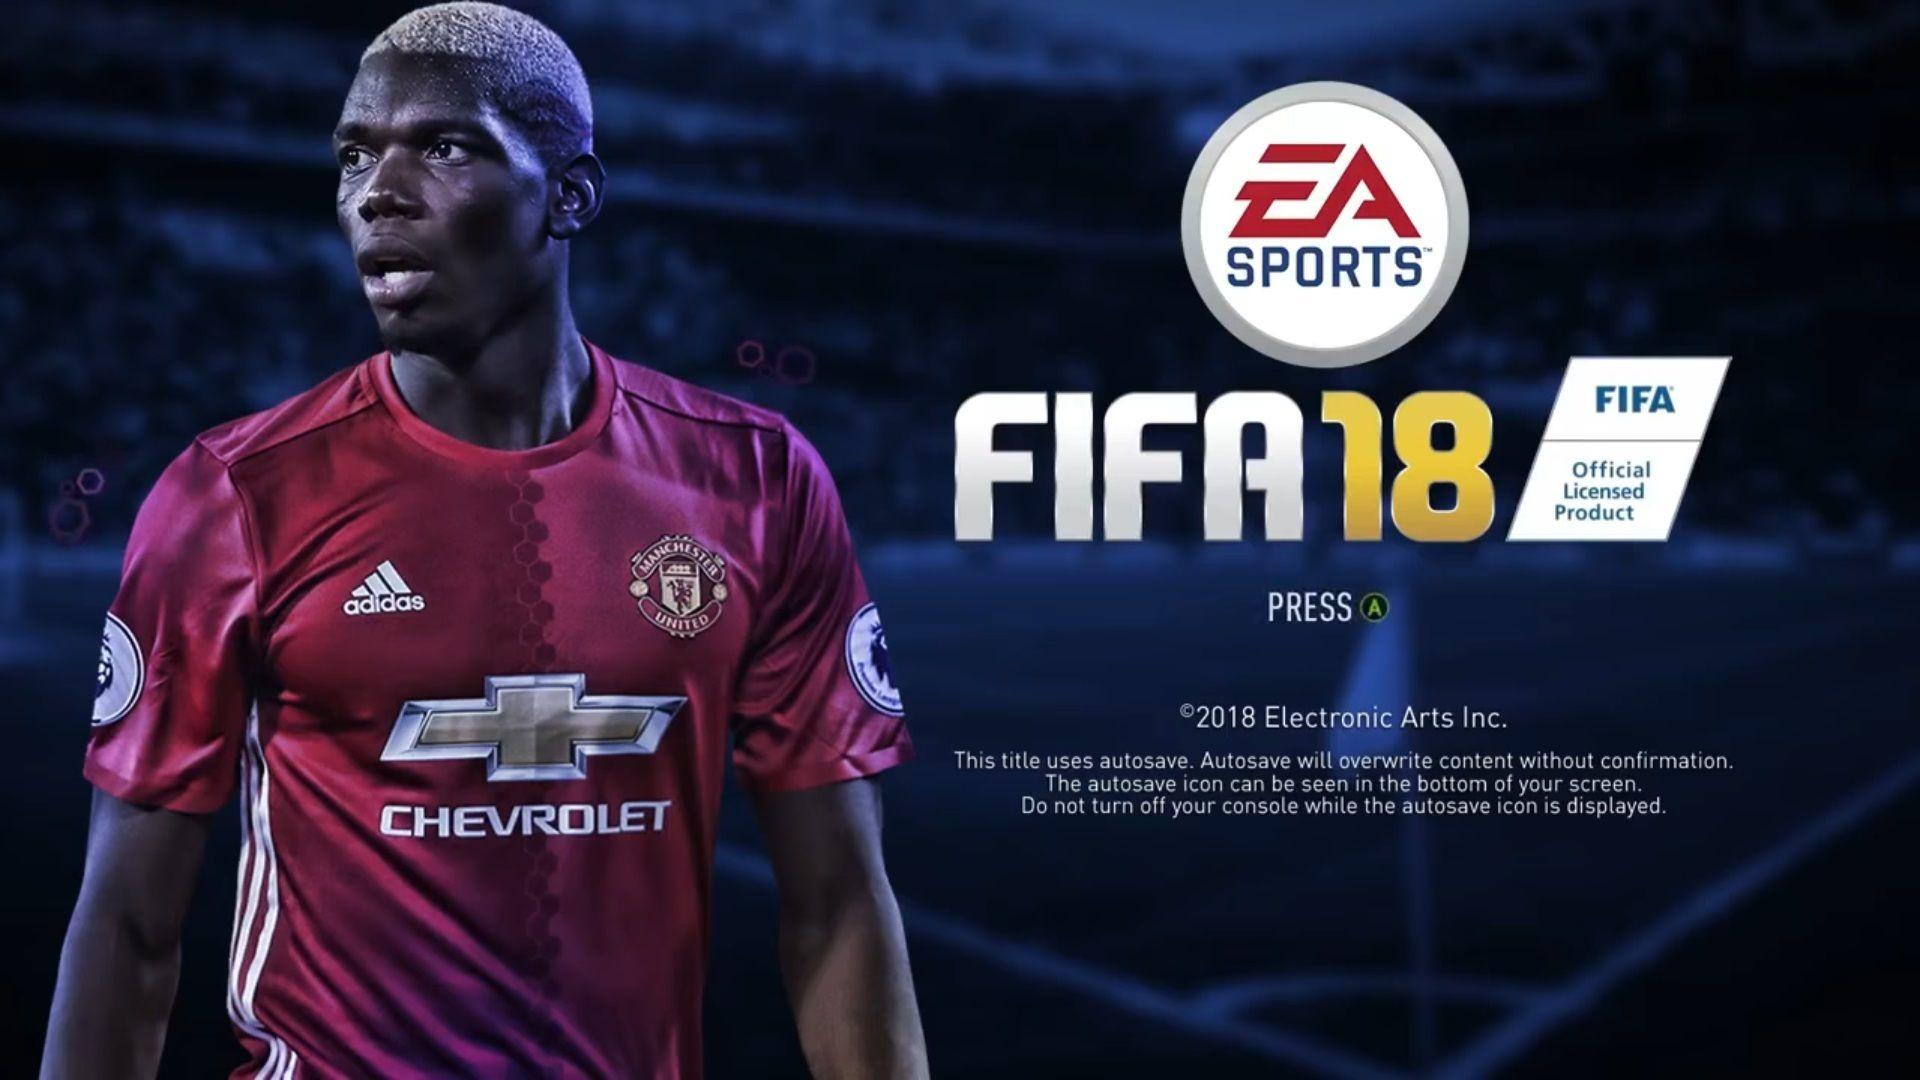 Did a FIFA 18 video just leak, or is it fake?